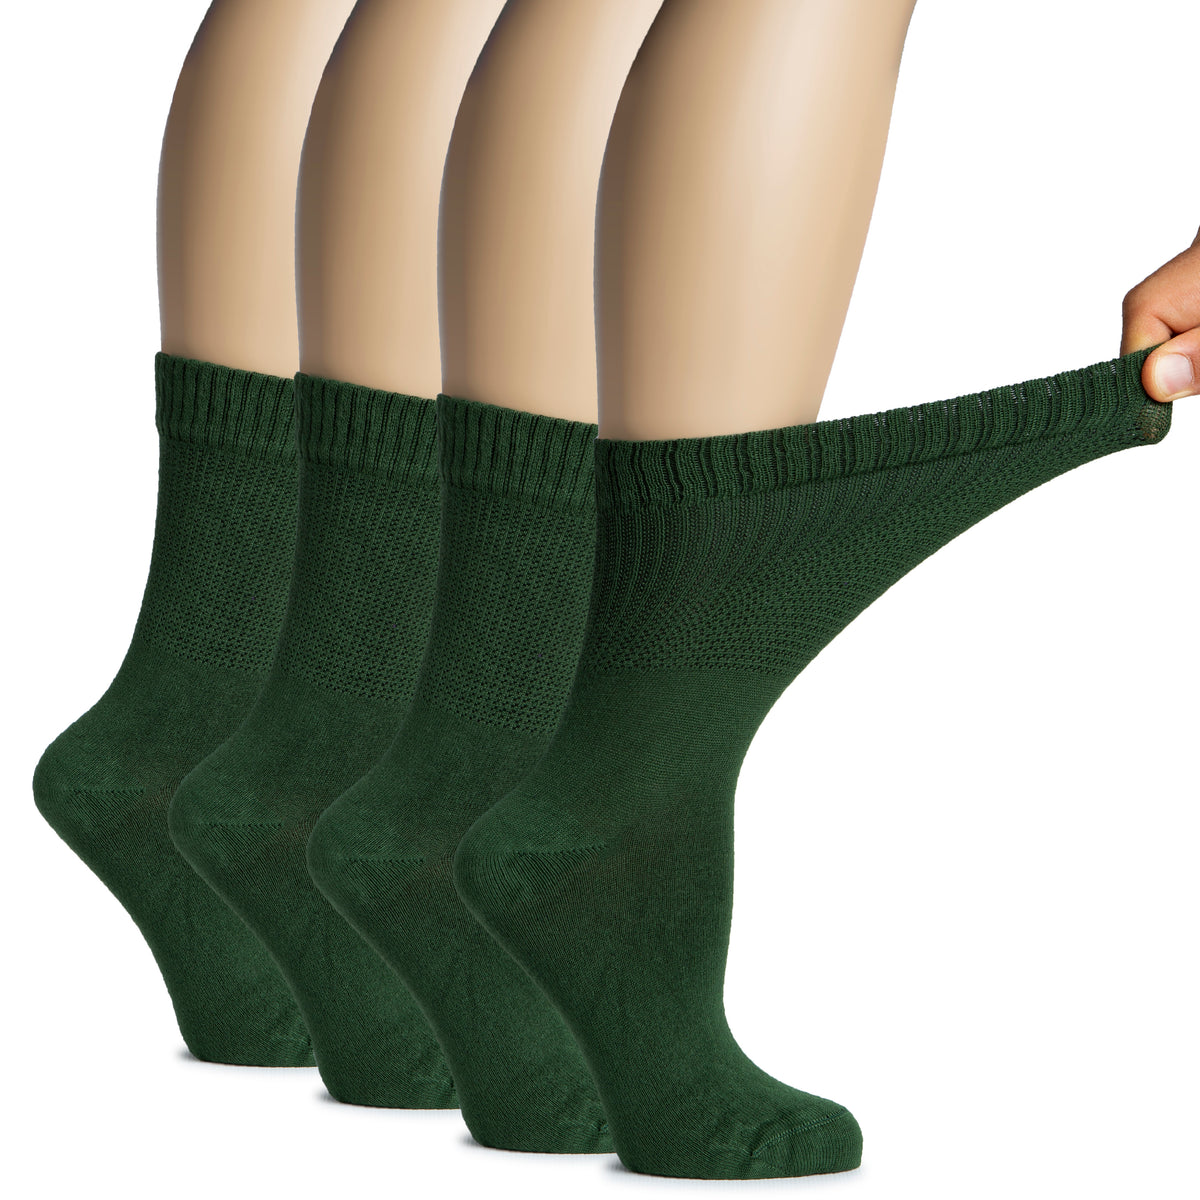 A man's hand displays two pair of green Women's Bamboo Diabetic Crew Socks, designed to provide comfort and support for those with diabetes.